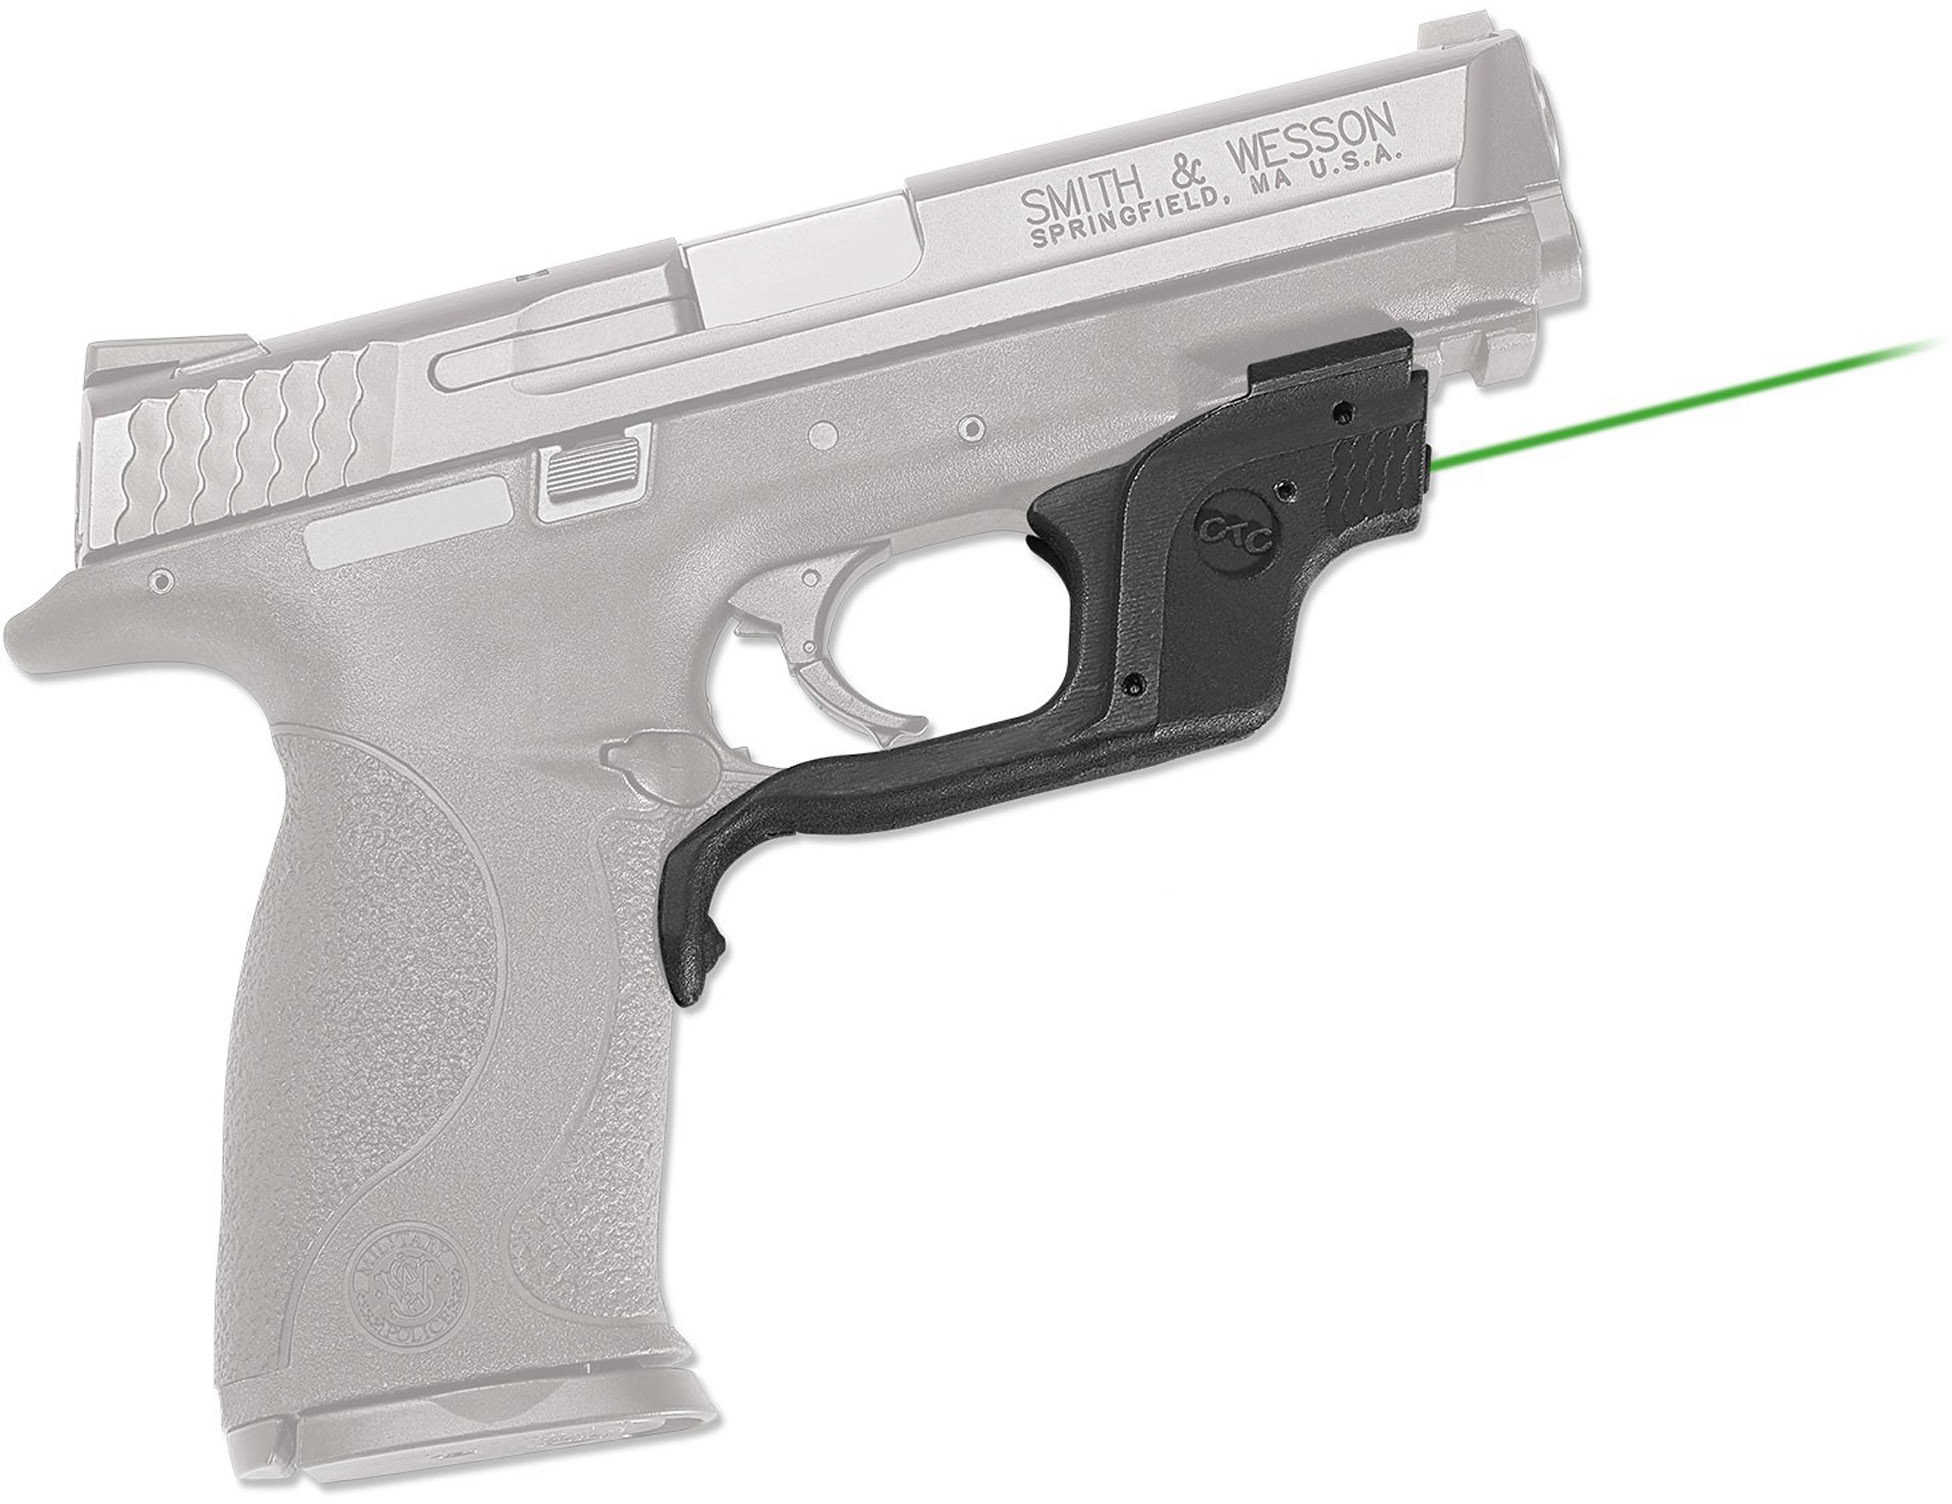 Crimson Trace Corporation Green Laserguard Smith & Wesson M&P Compact Full Black User Installed Battery Lg-